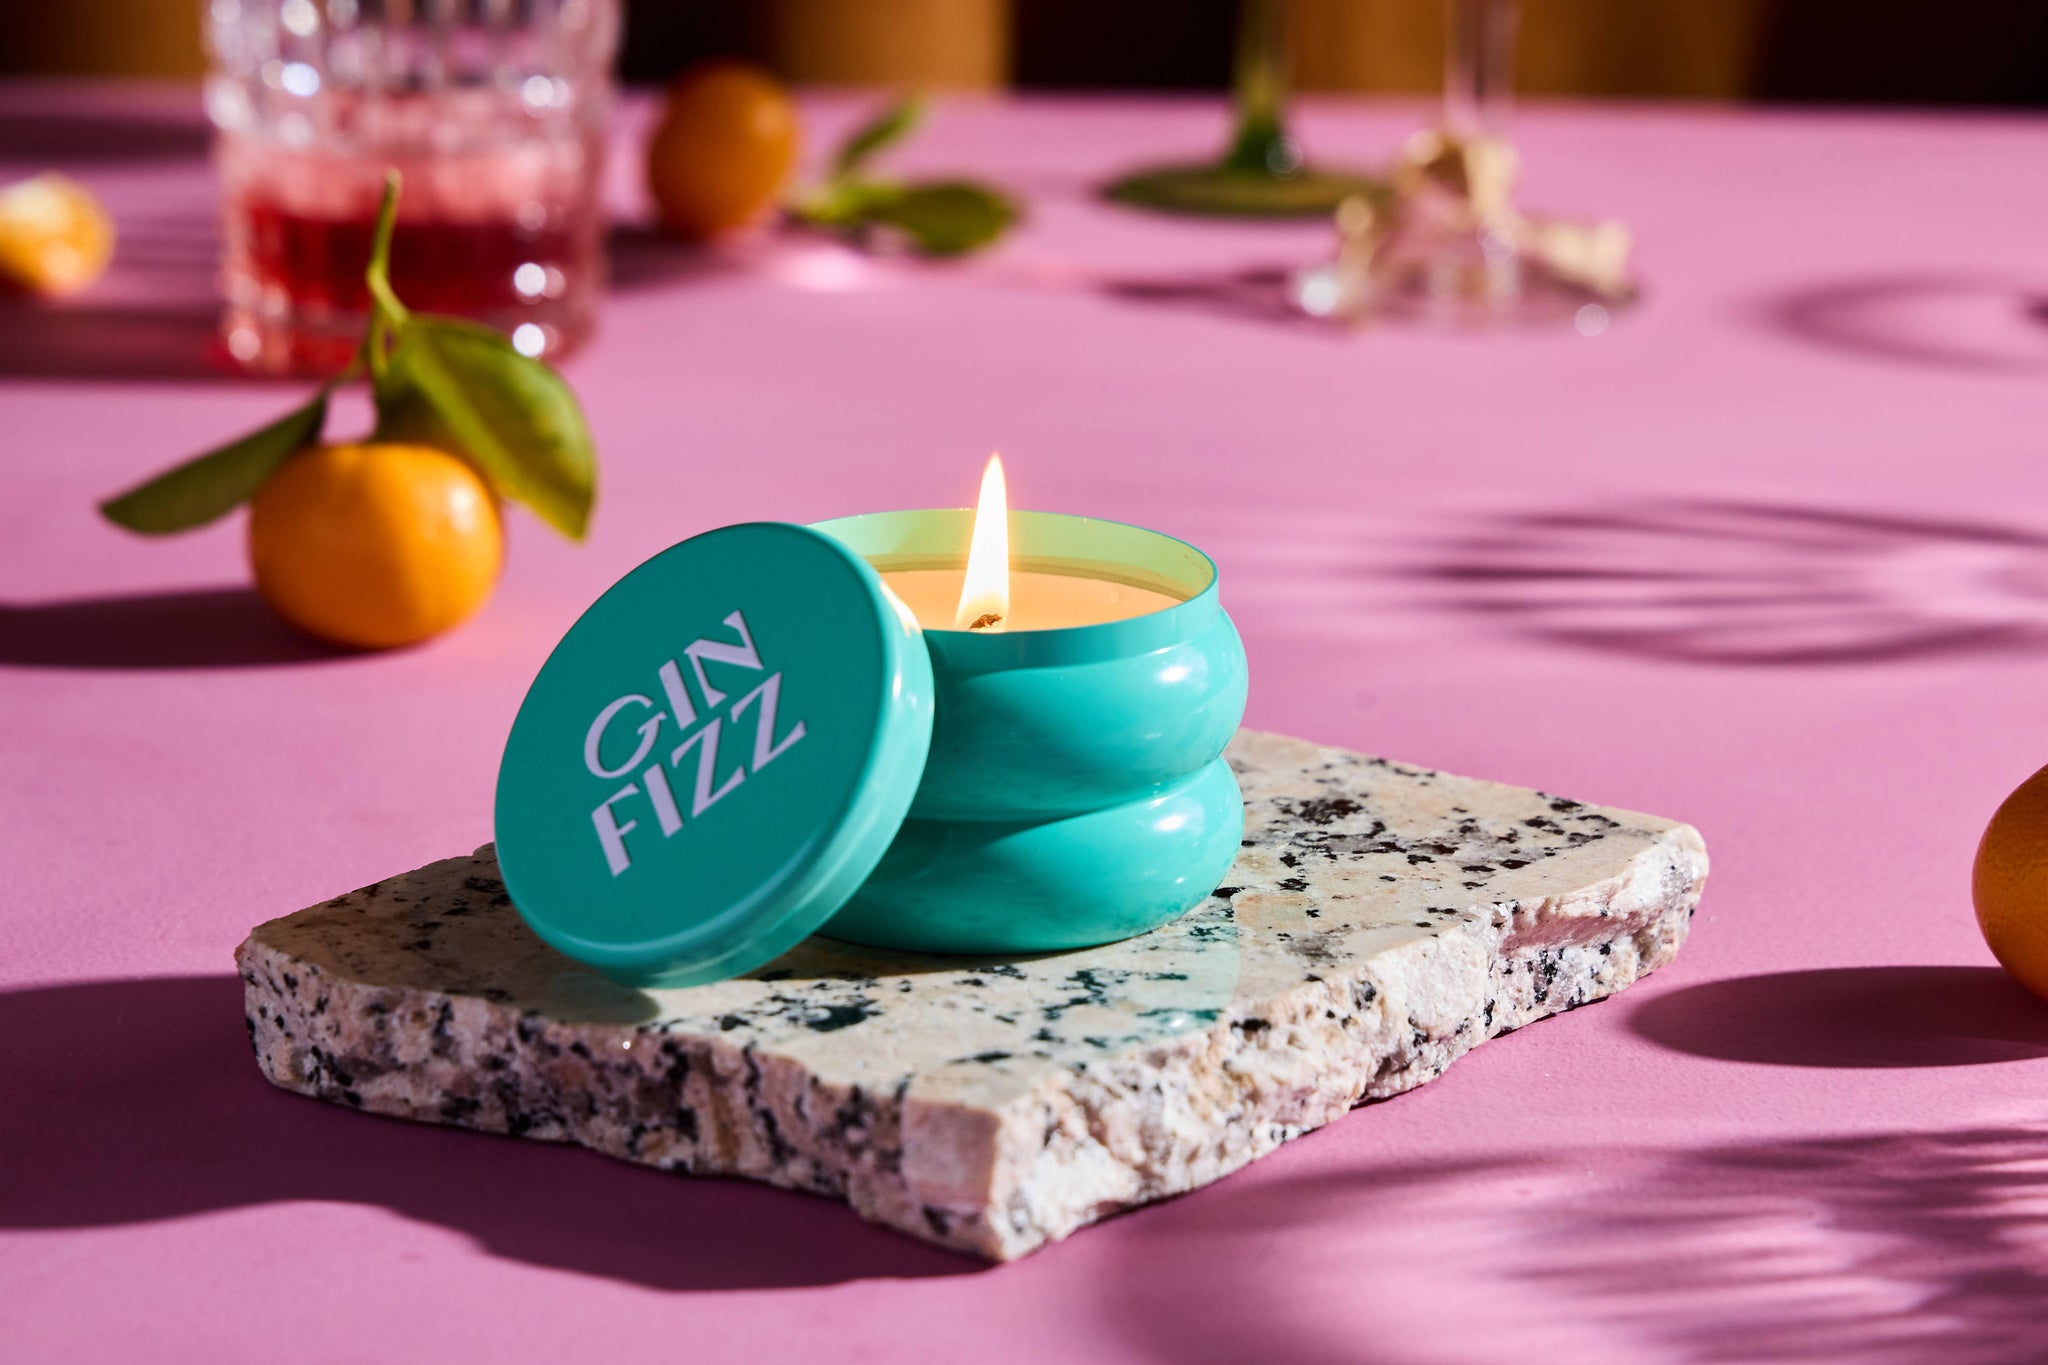 "Gin Fizz" Candle by Rewined